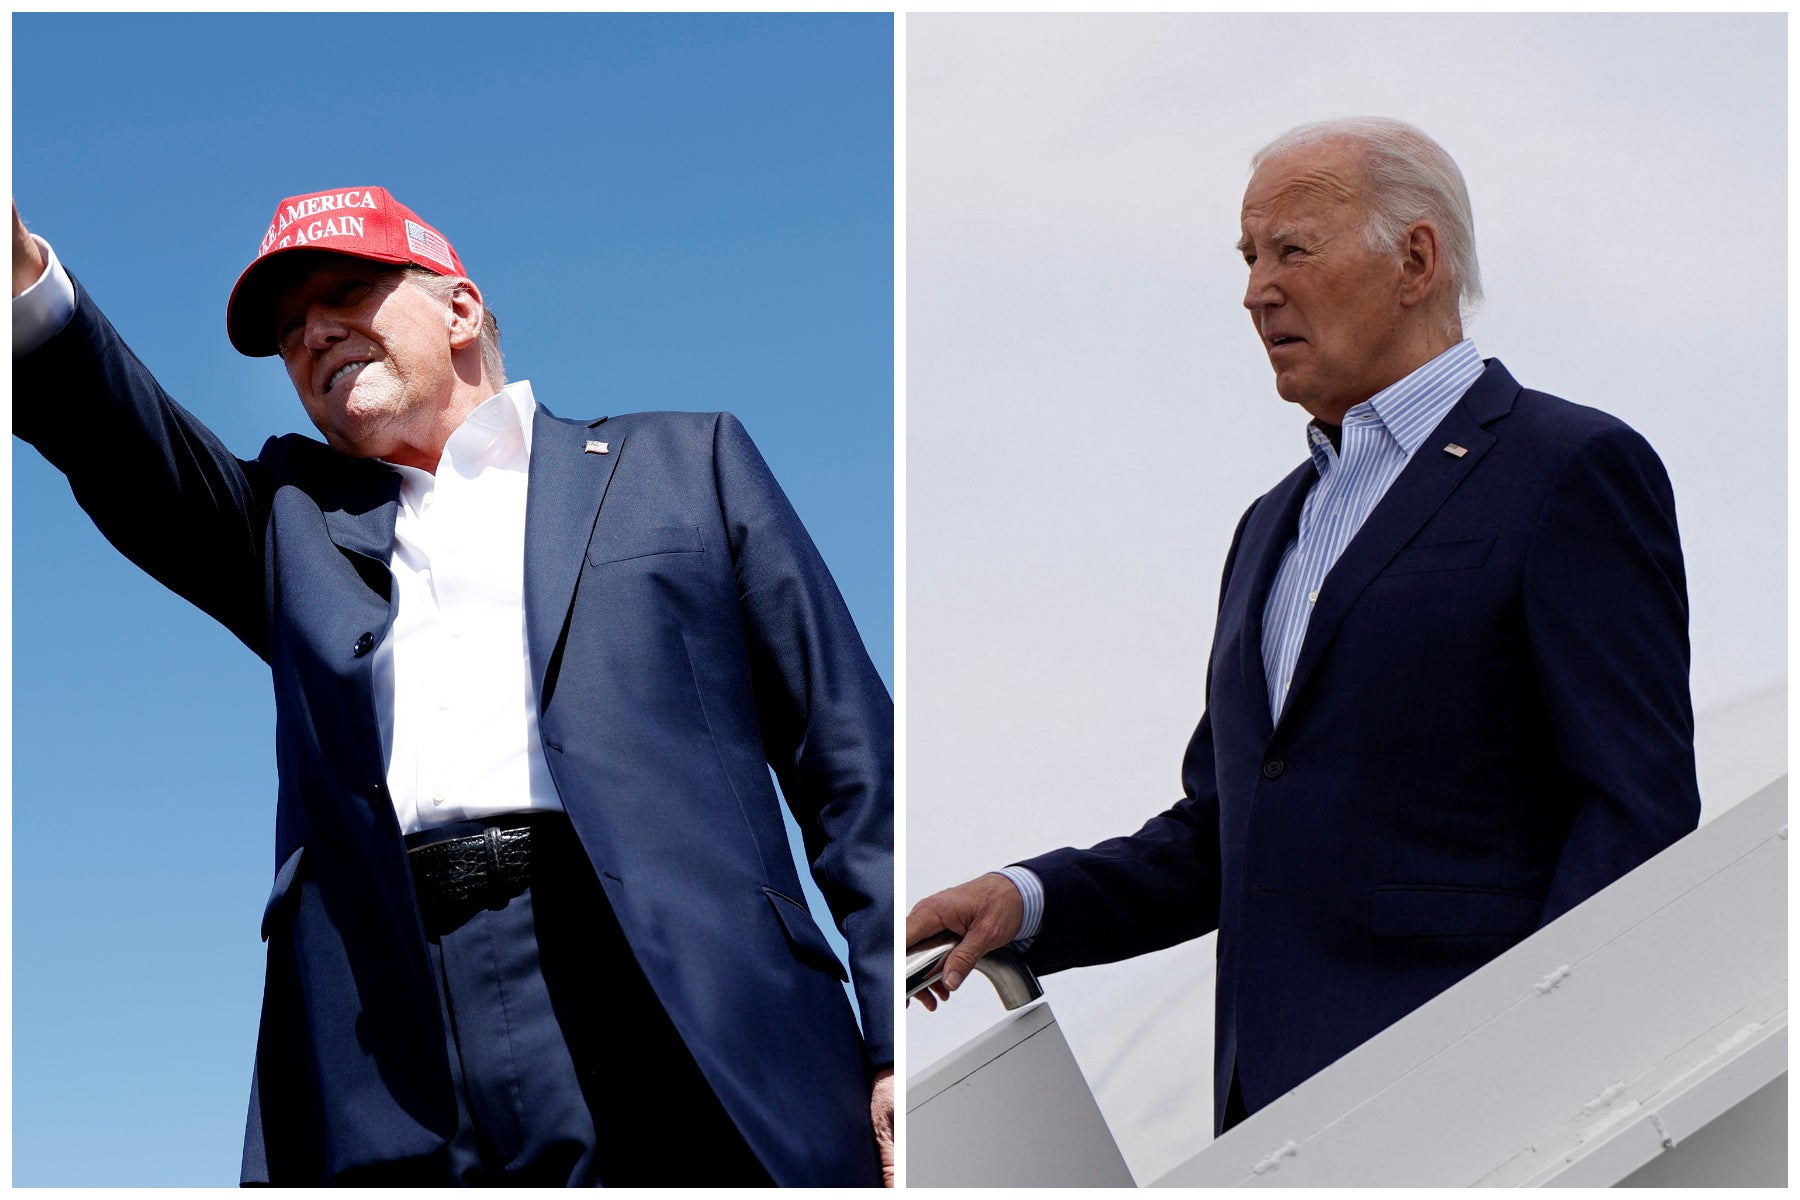 Donald Trump (left) greets rallygoers in Virginia while Joe Biden (right) steps off Air Force One while meeting donors in New York over the weekend